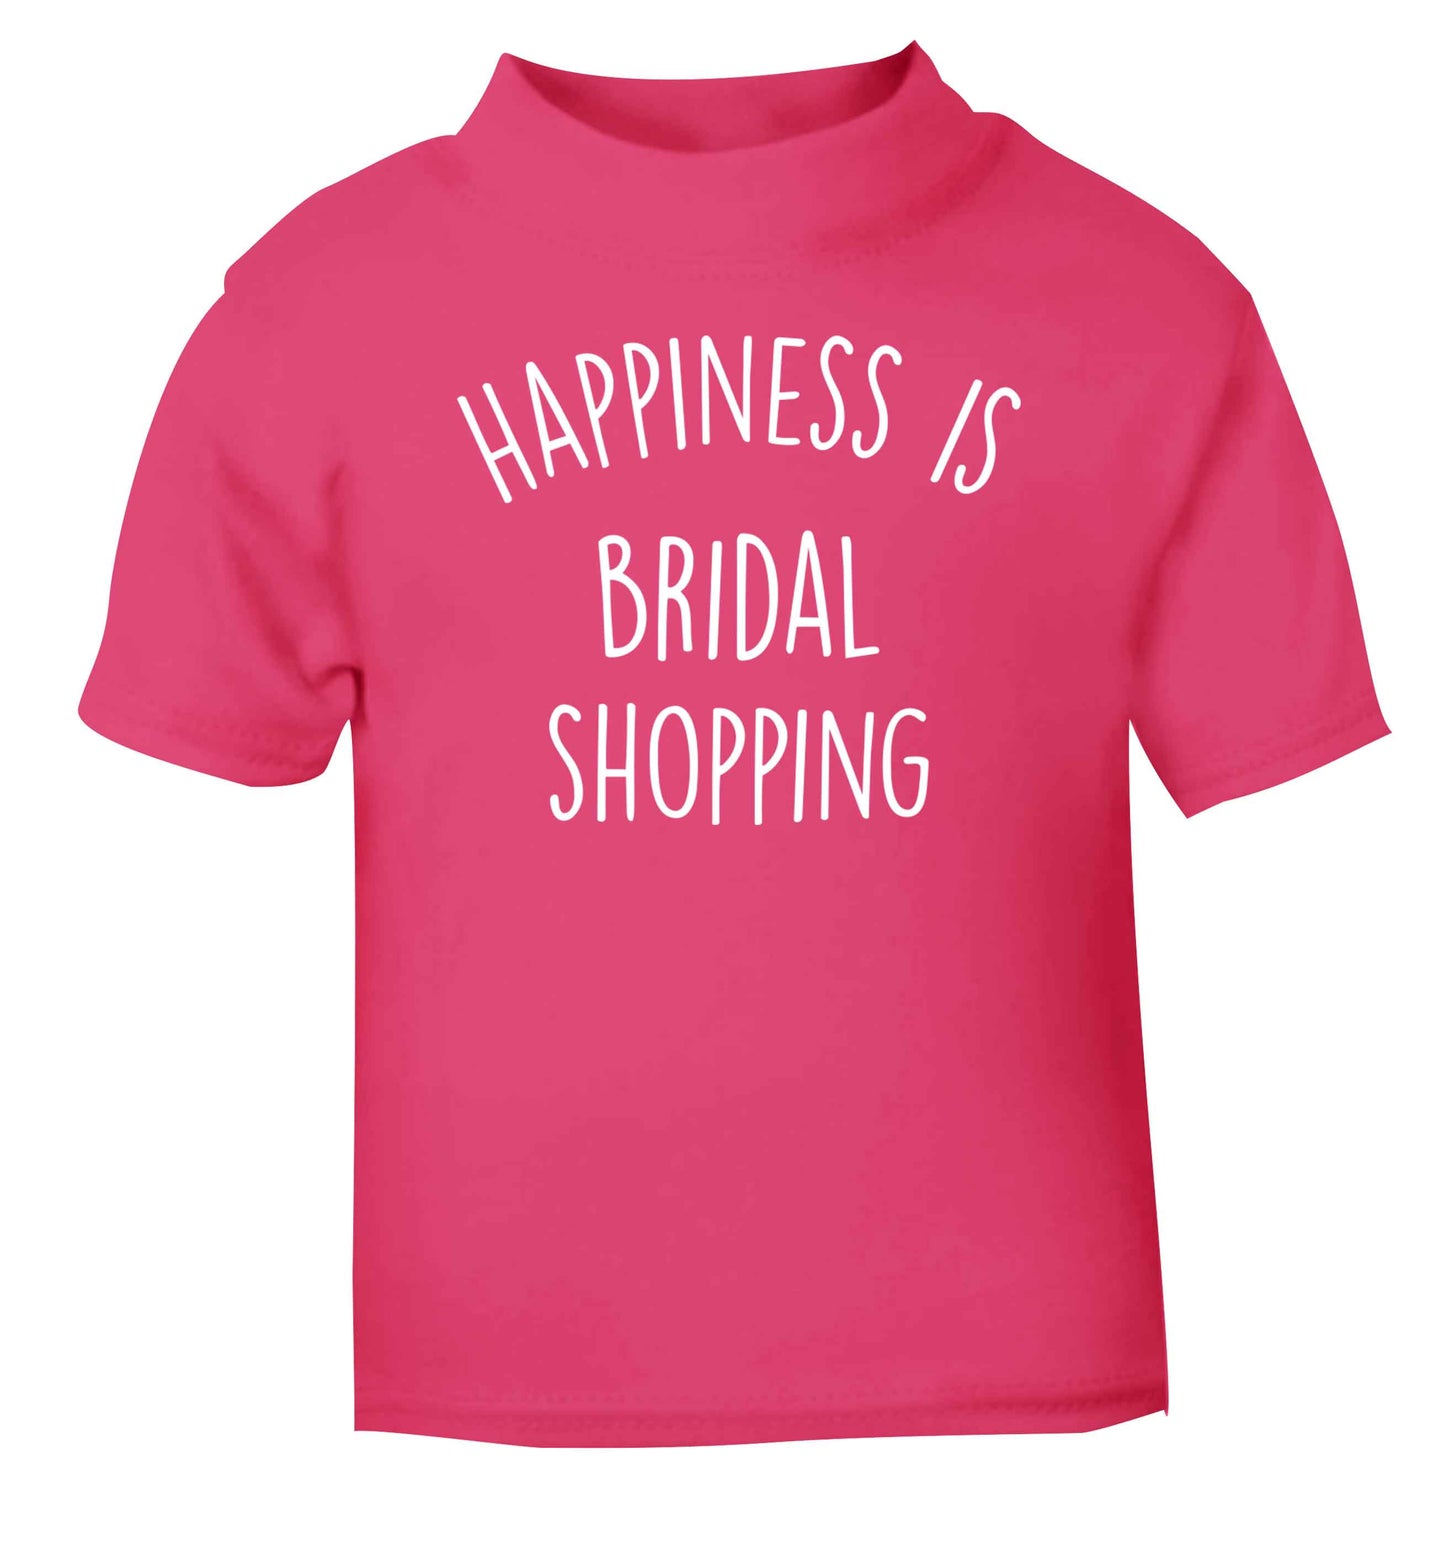 Happiness is bridal shopping pink baby toddler Tshirt 2 Years